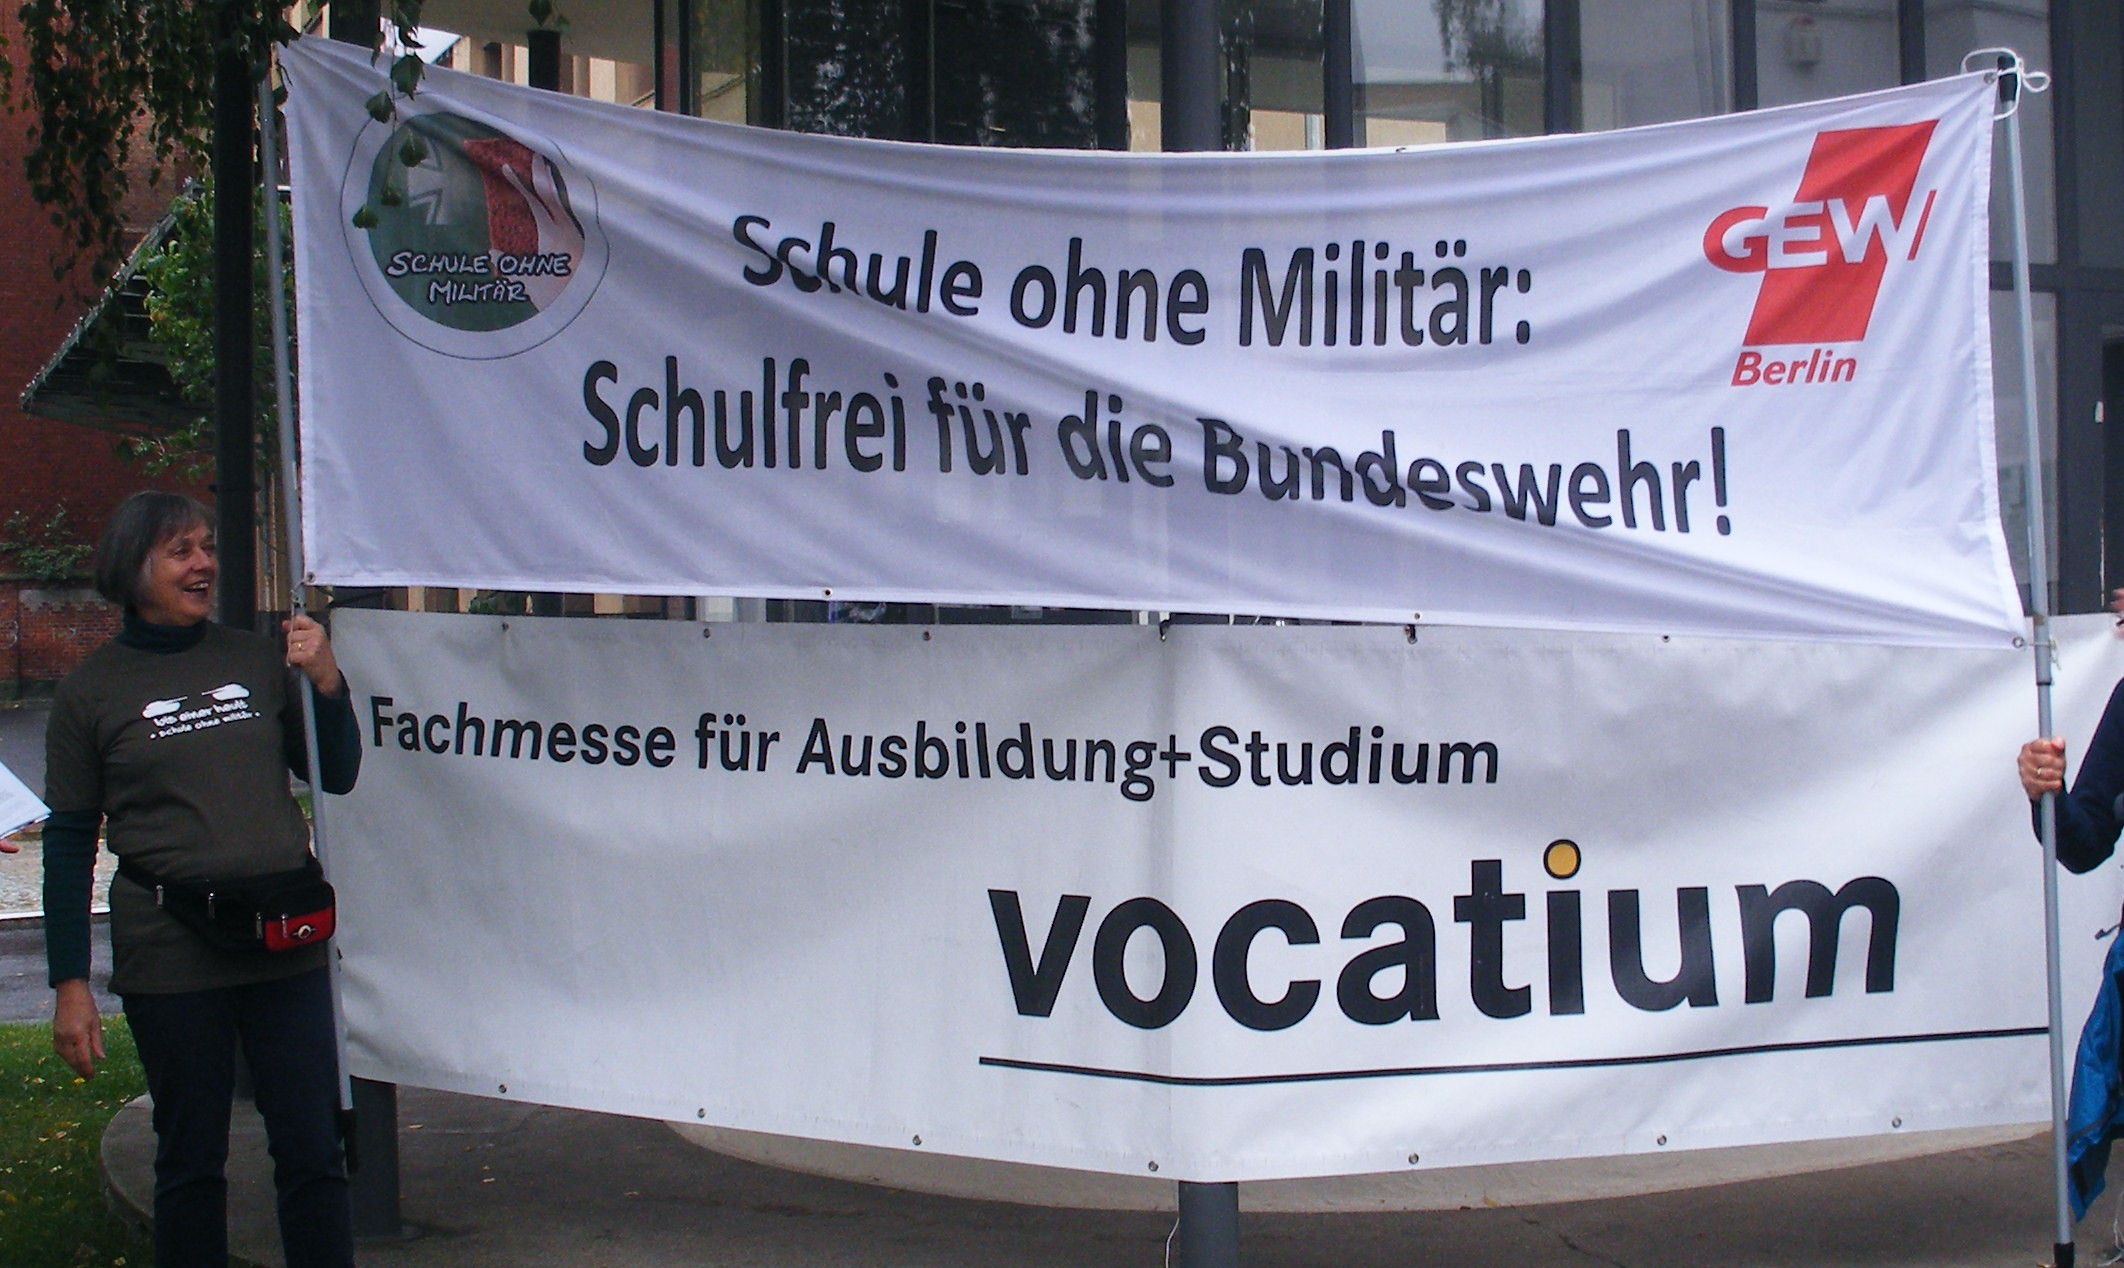 a sign in the center of two men standing under a banner